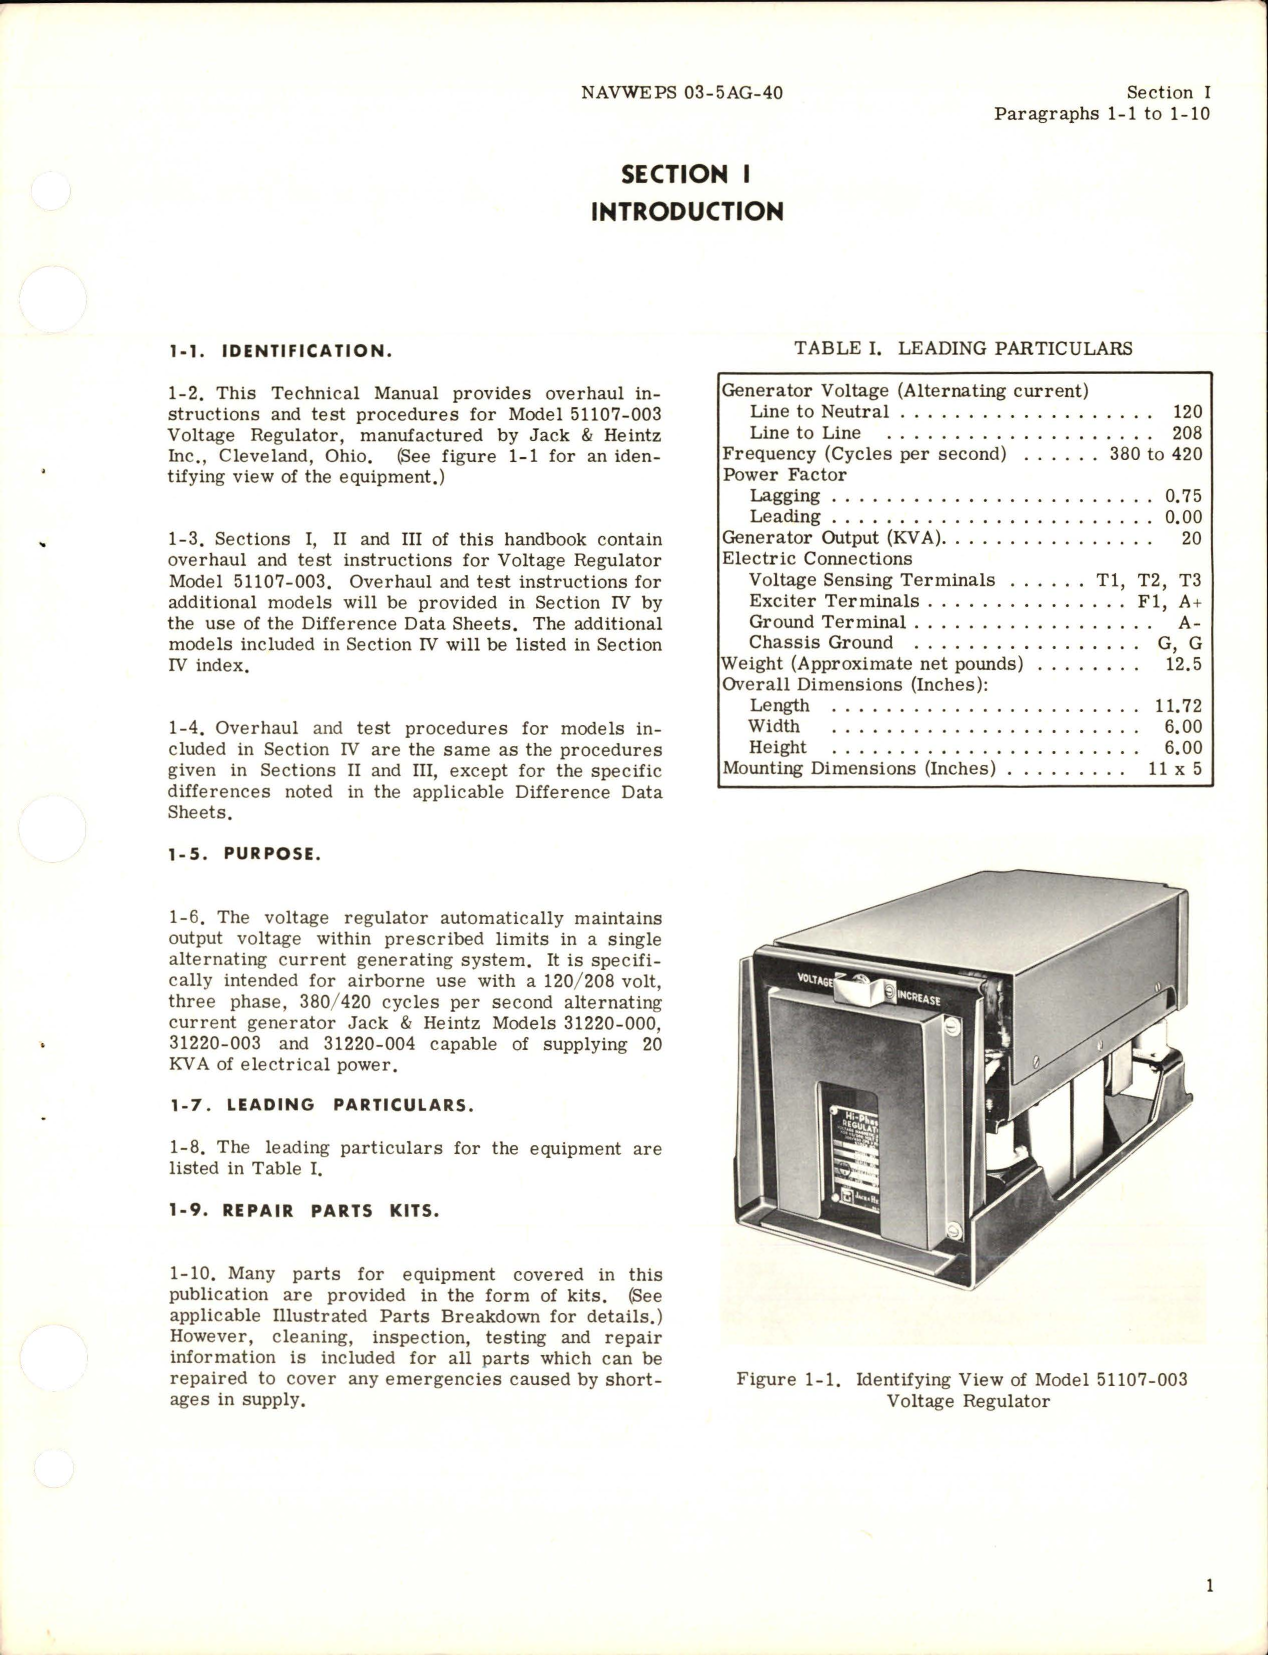 Sample page 5 from AirCorps Library document: Overhaul Instructions for Voltage Regulator - Model 51107-003